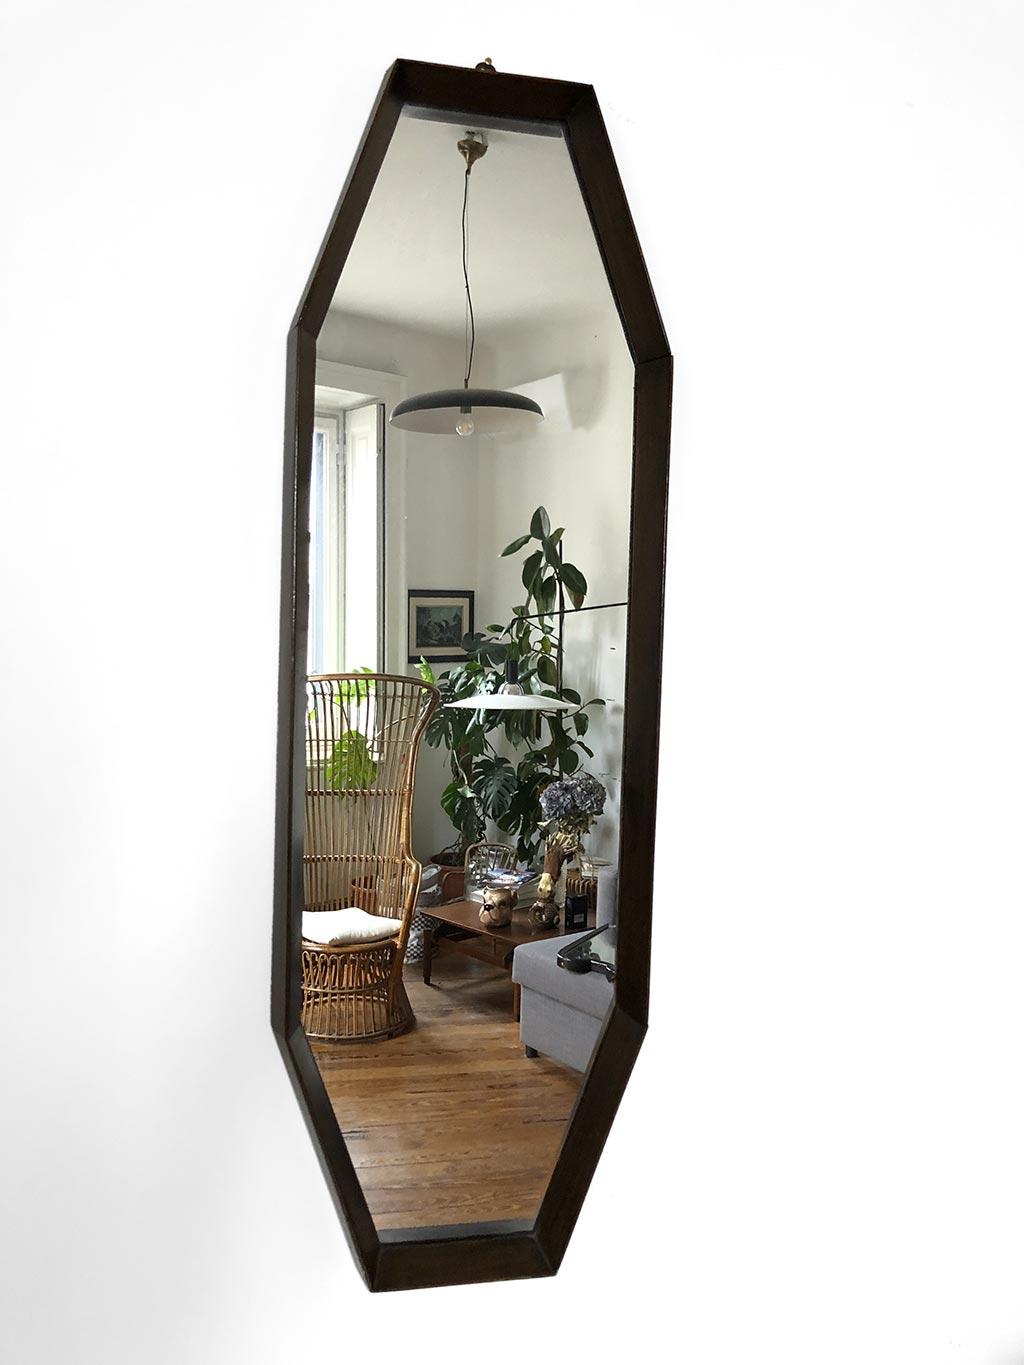 Italian 1960s mirror with an elongated octagonal shape. Teak frame, original silver mirroring. Very good conditions. Natural signs of aging.

dim. 92 x 29 x 5 cm